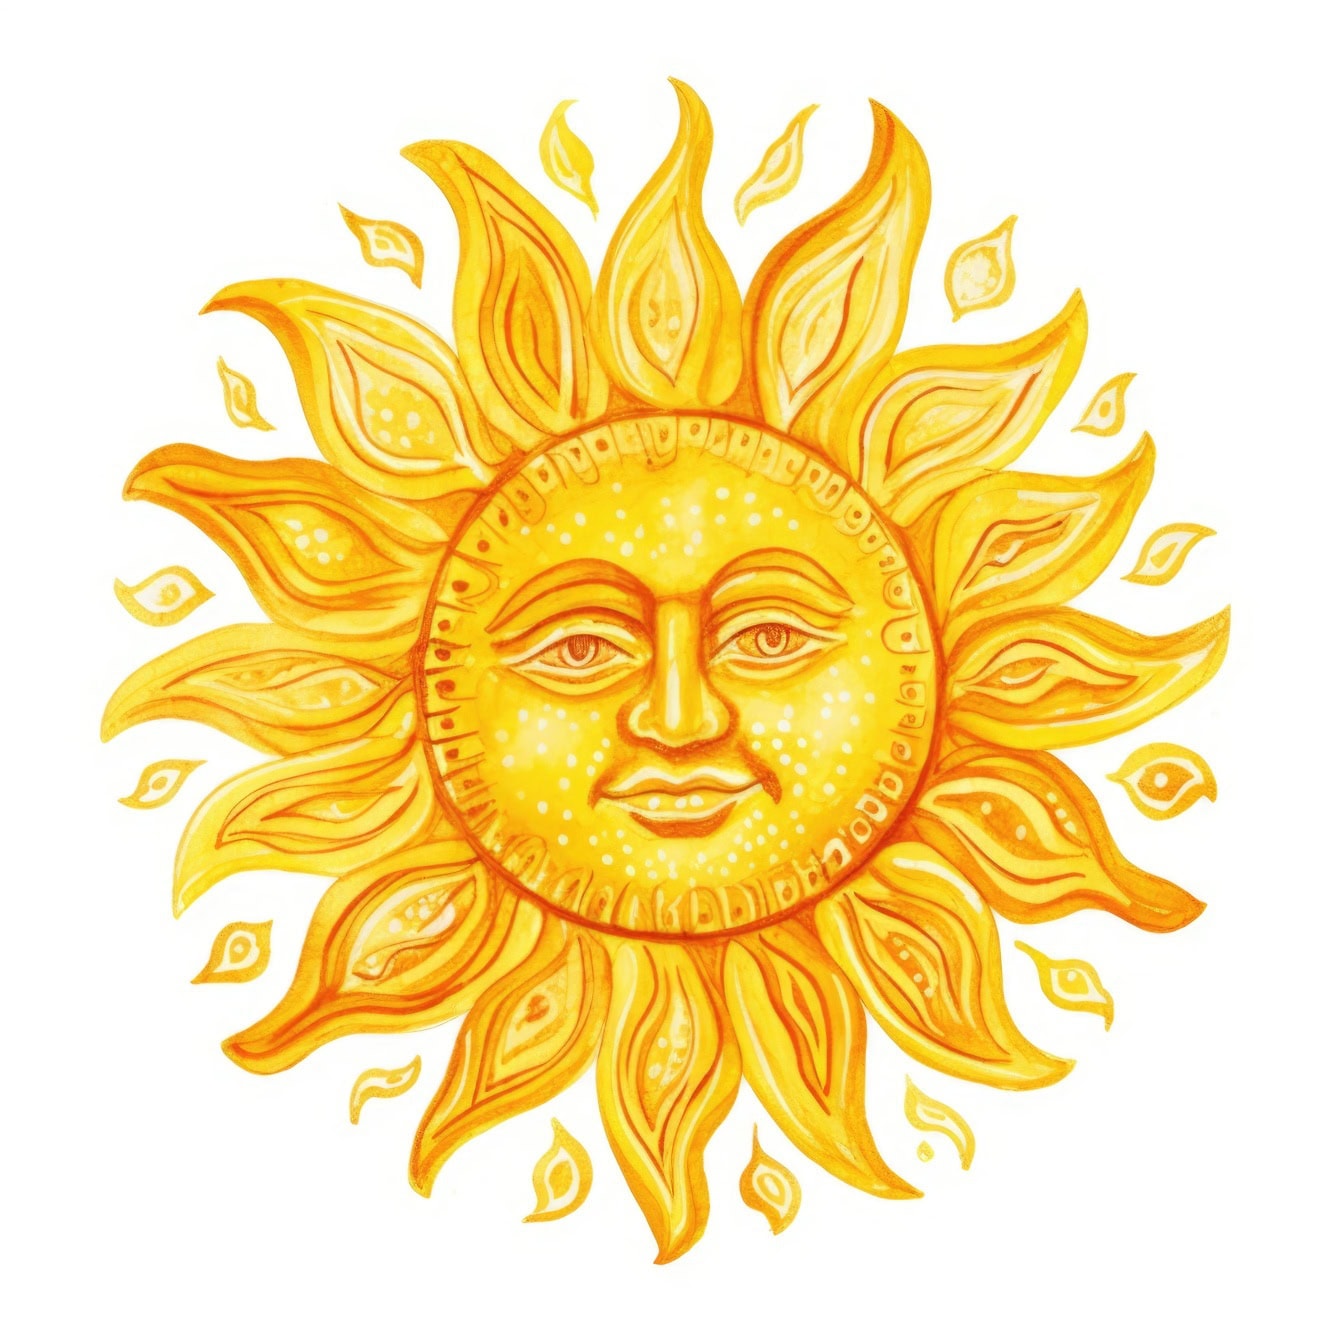 Graphic illustration of an orange-yellow Sun with a face on white background